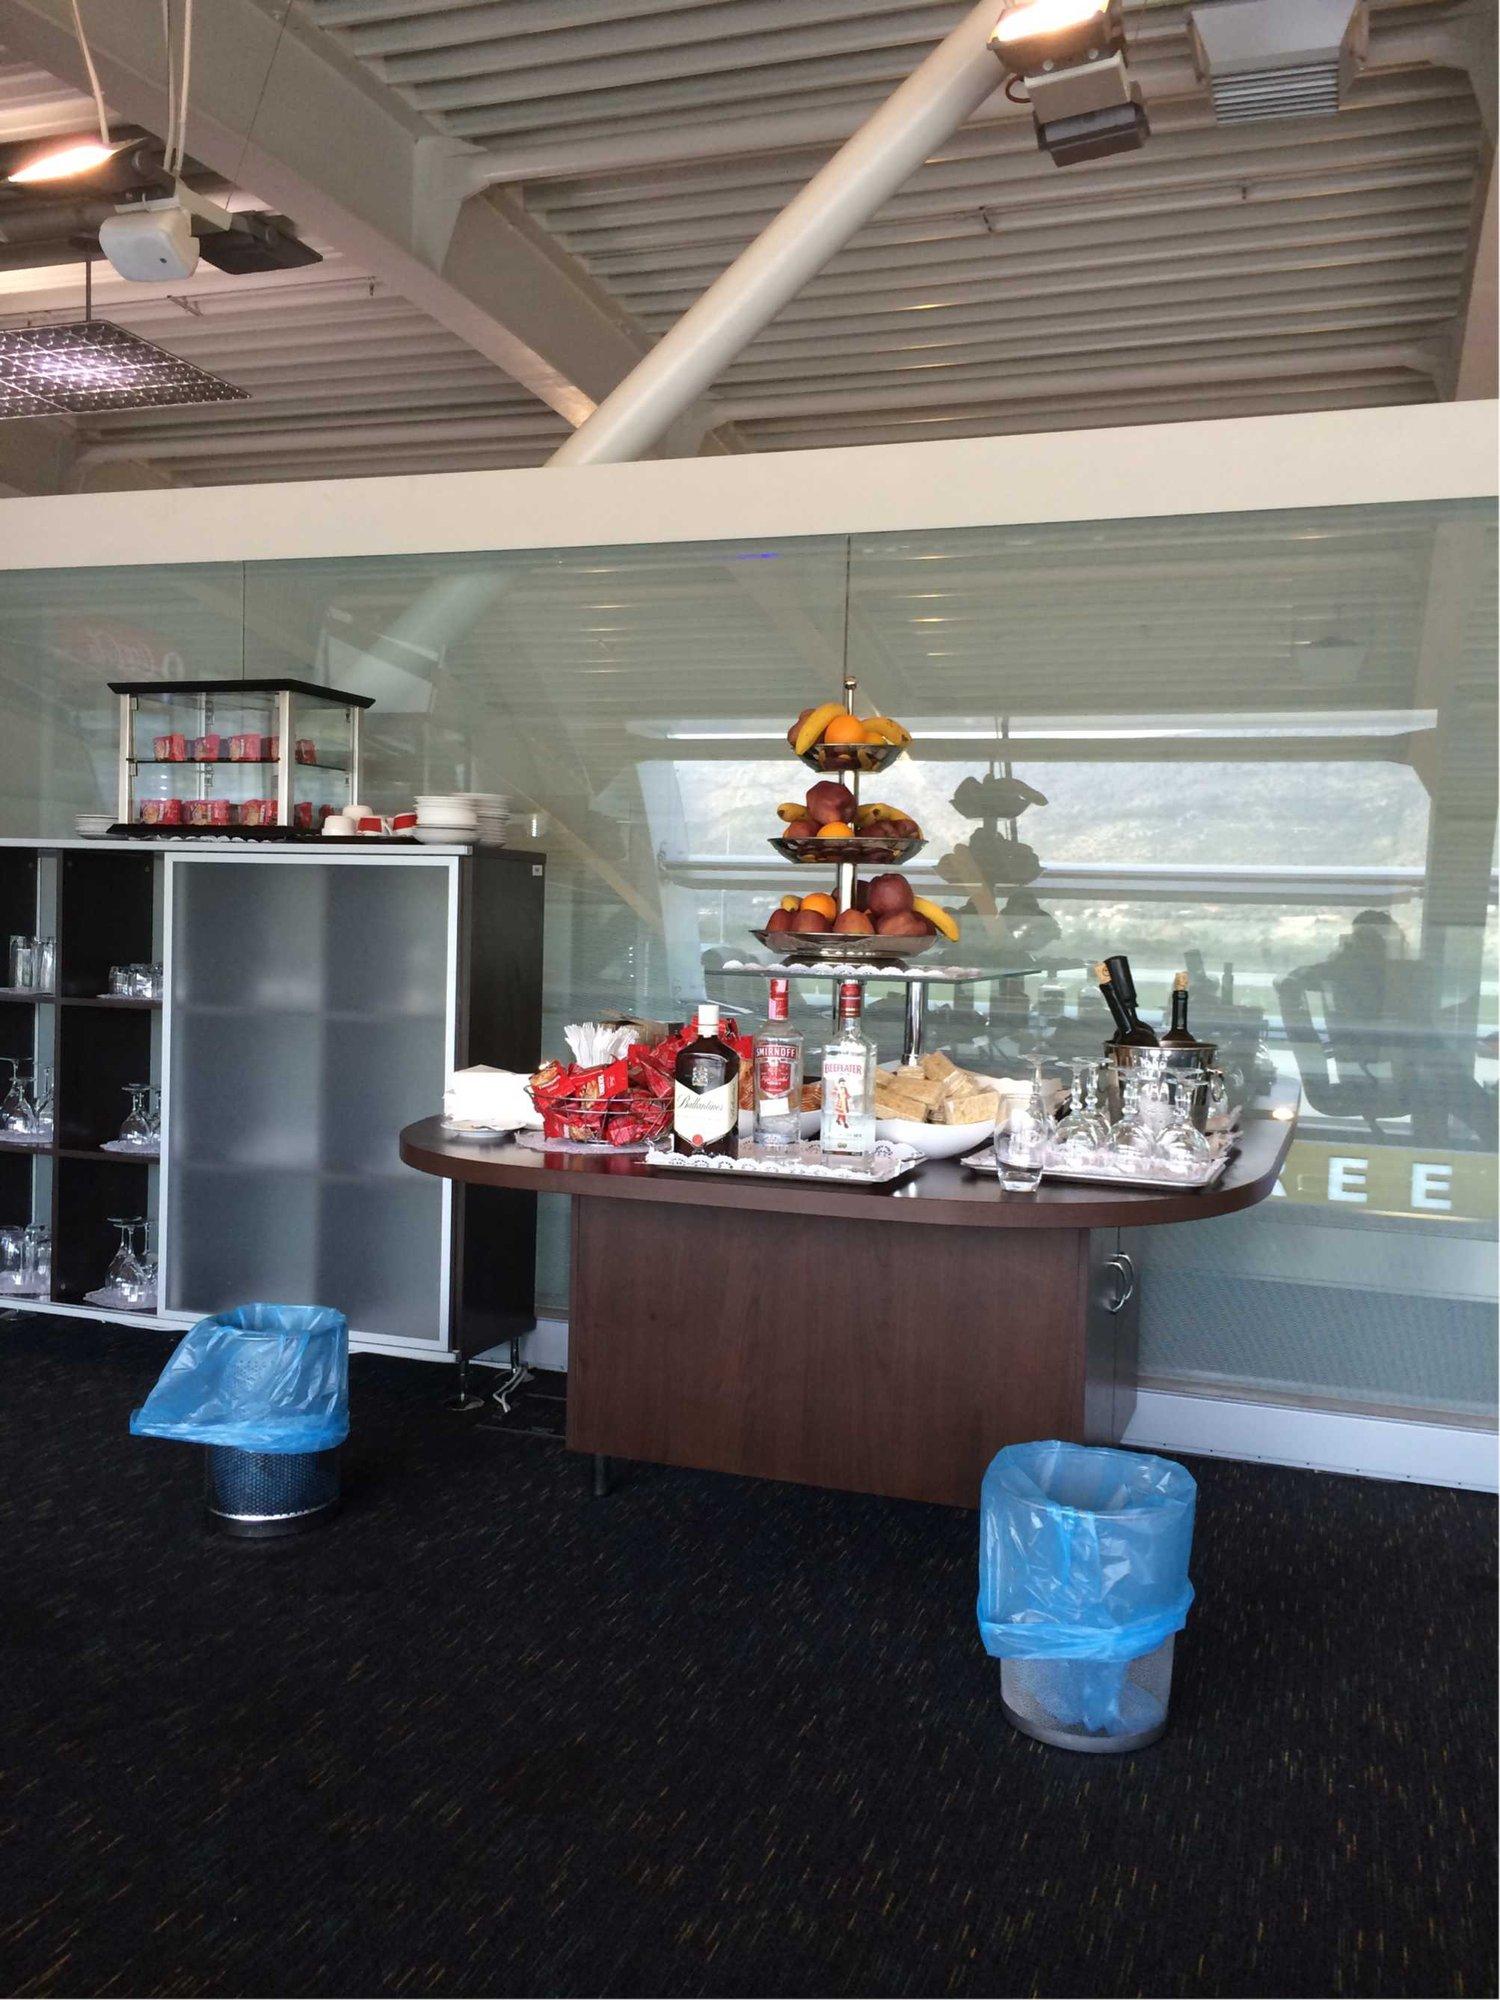 Airport Business Lounge image 17 of 20